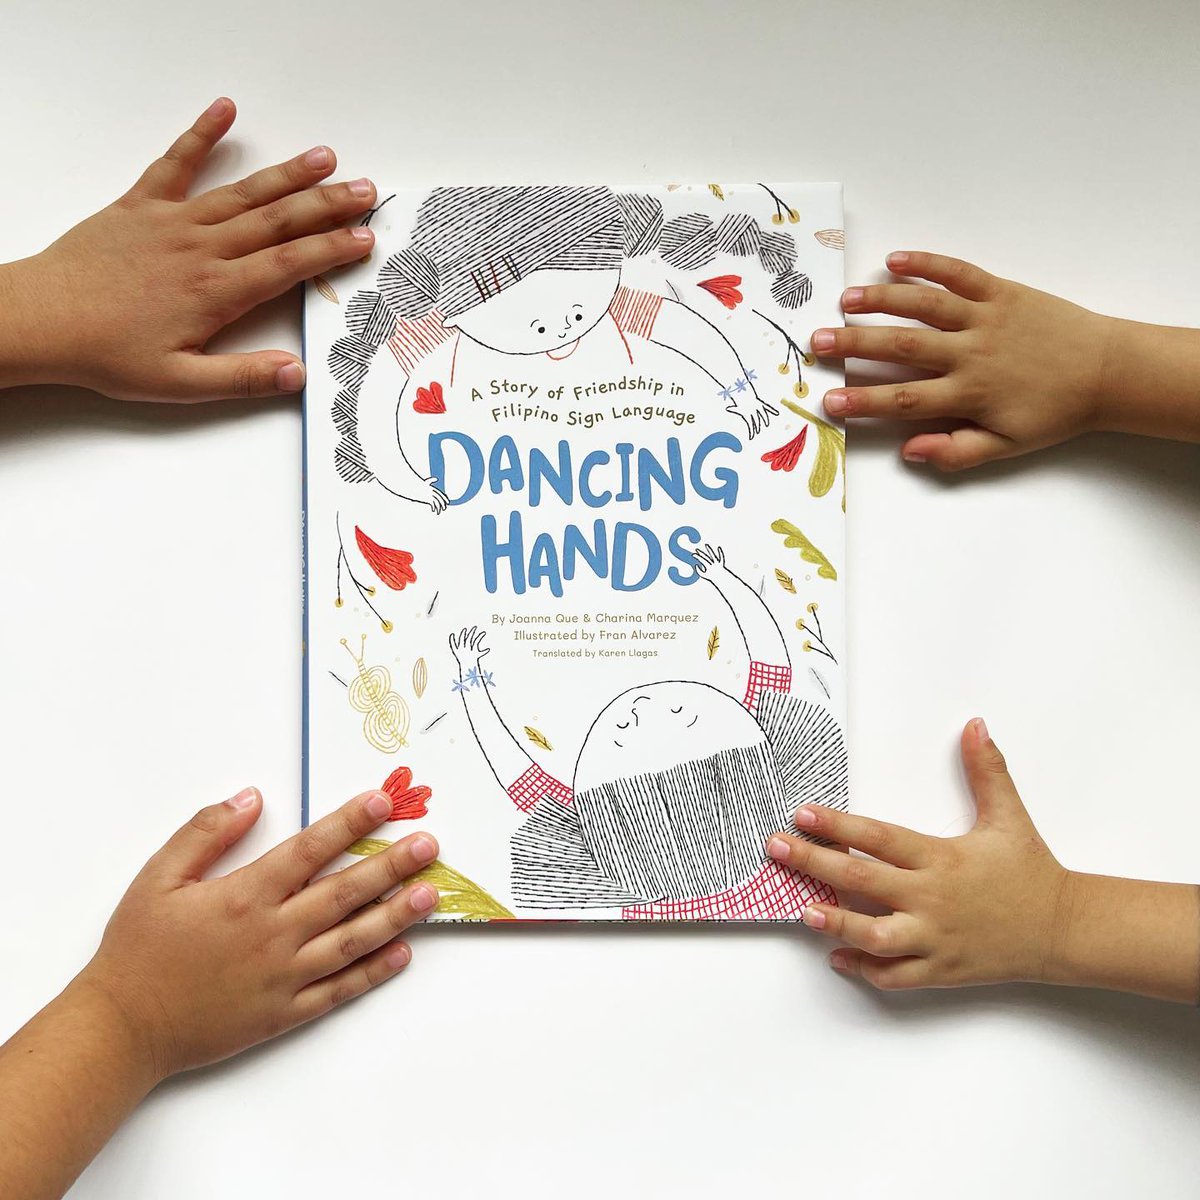 It's #InternationalDayOfSignLanguages 👐 This beautiful picture book introduces young readers to Filipino sign language through the growing friendship of Sam & Mai💙 ✍️Joanna Que, Charina Marquez, @nobeesnohoney & translated by Karen Llagas 📸OhTheBooksWeLove, Instagram